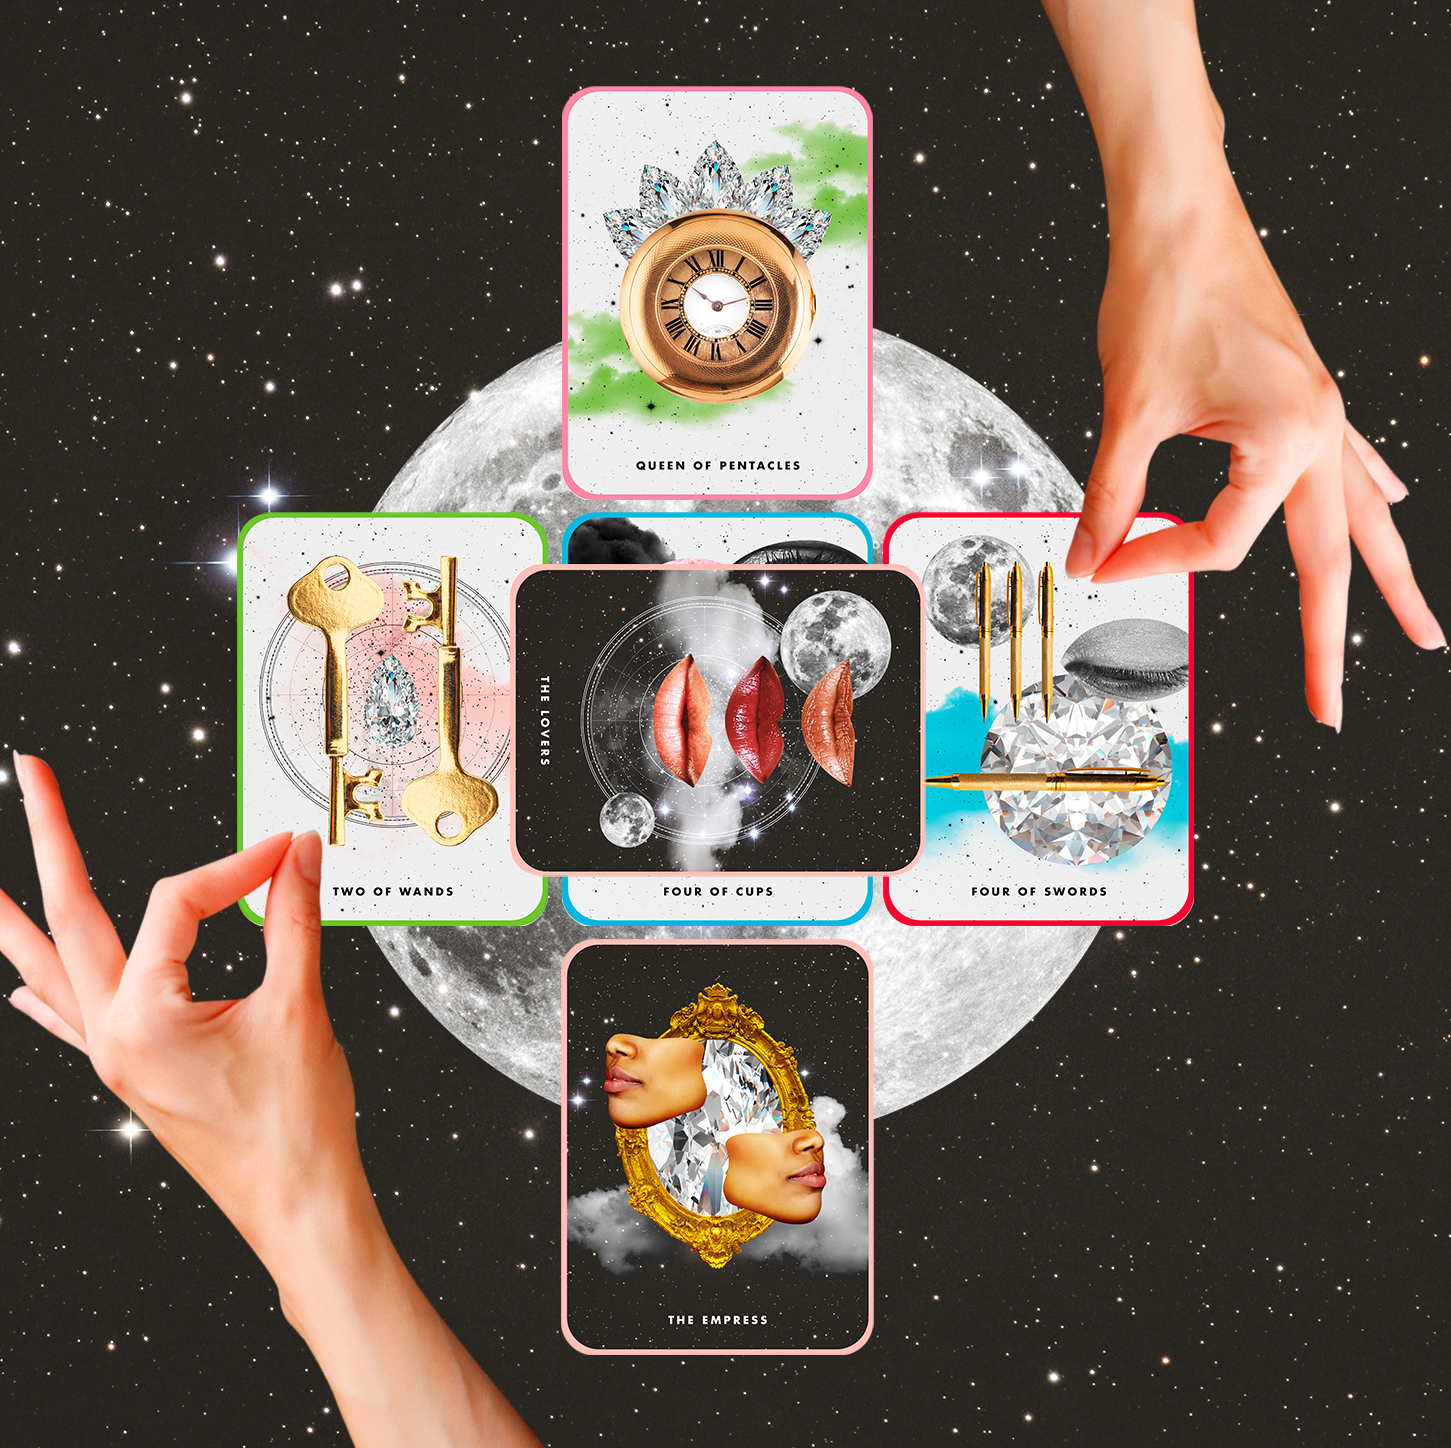 Your Weekly Tarot Card Reading Asks You to Fake It Til You Make It